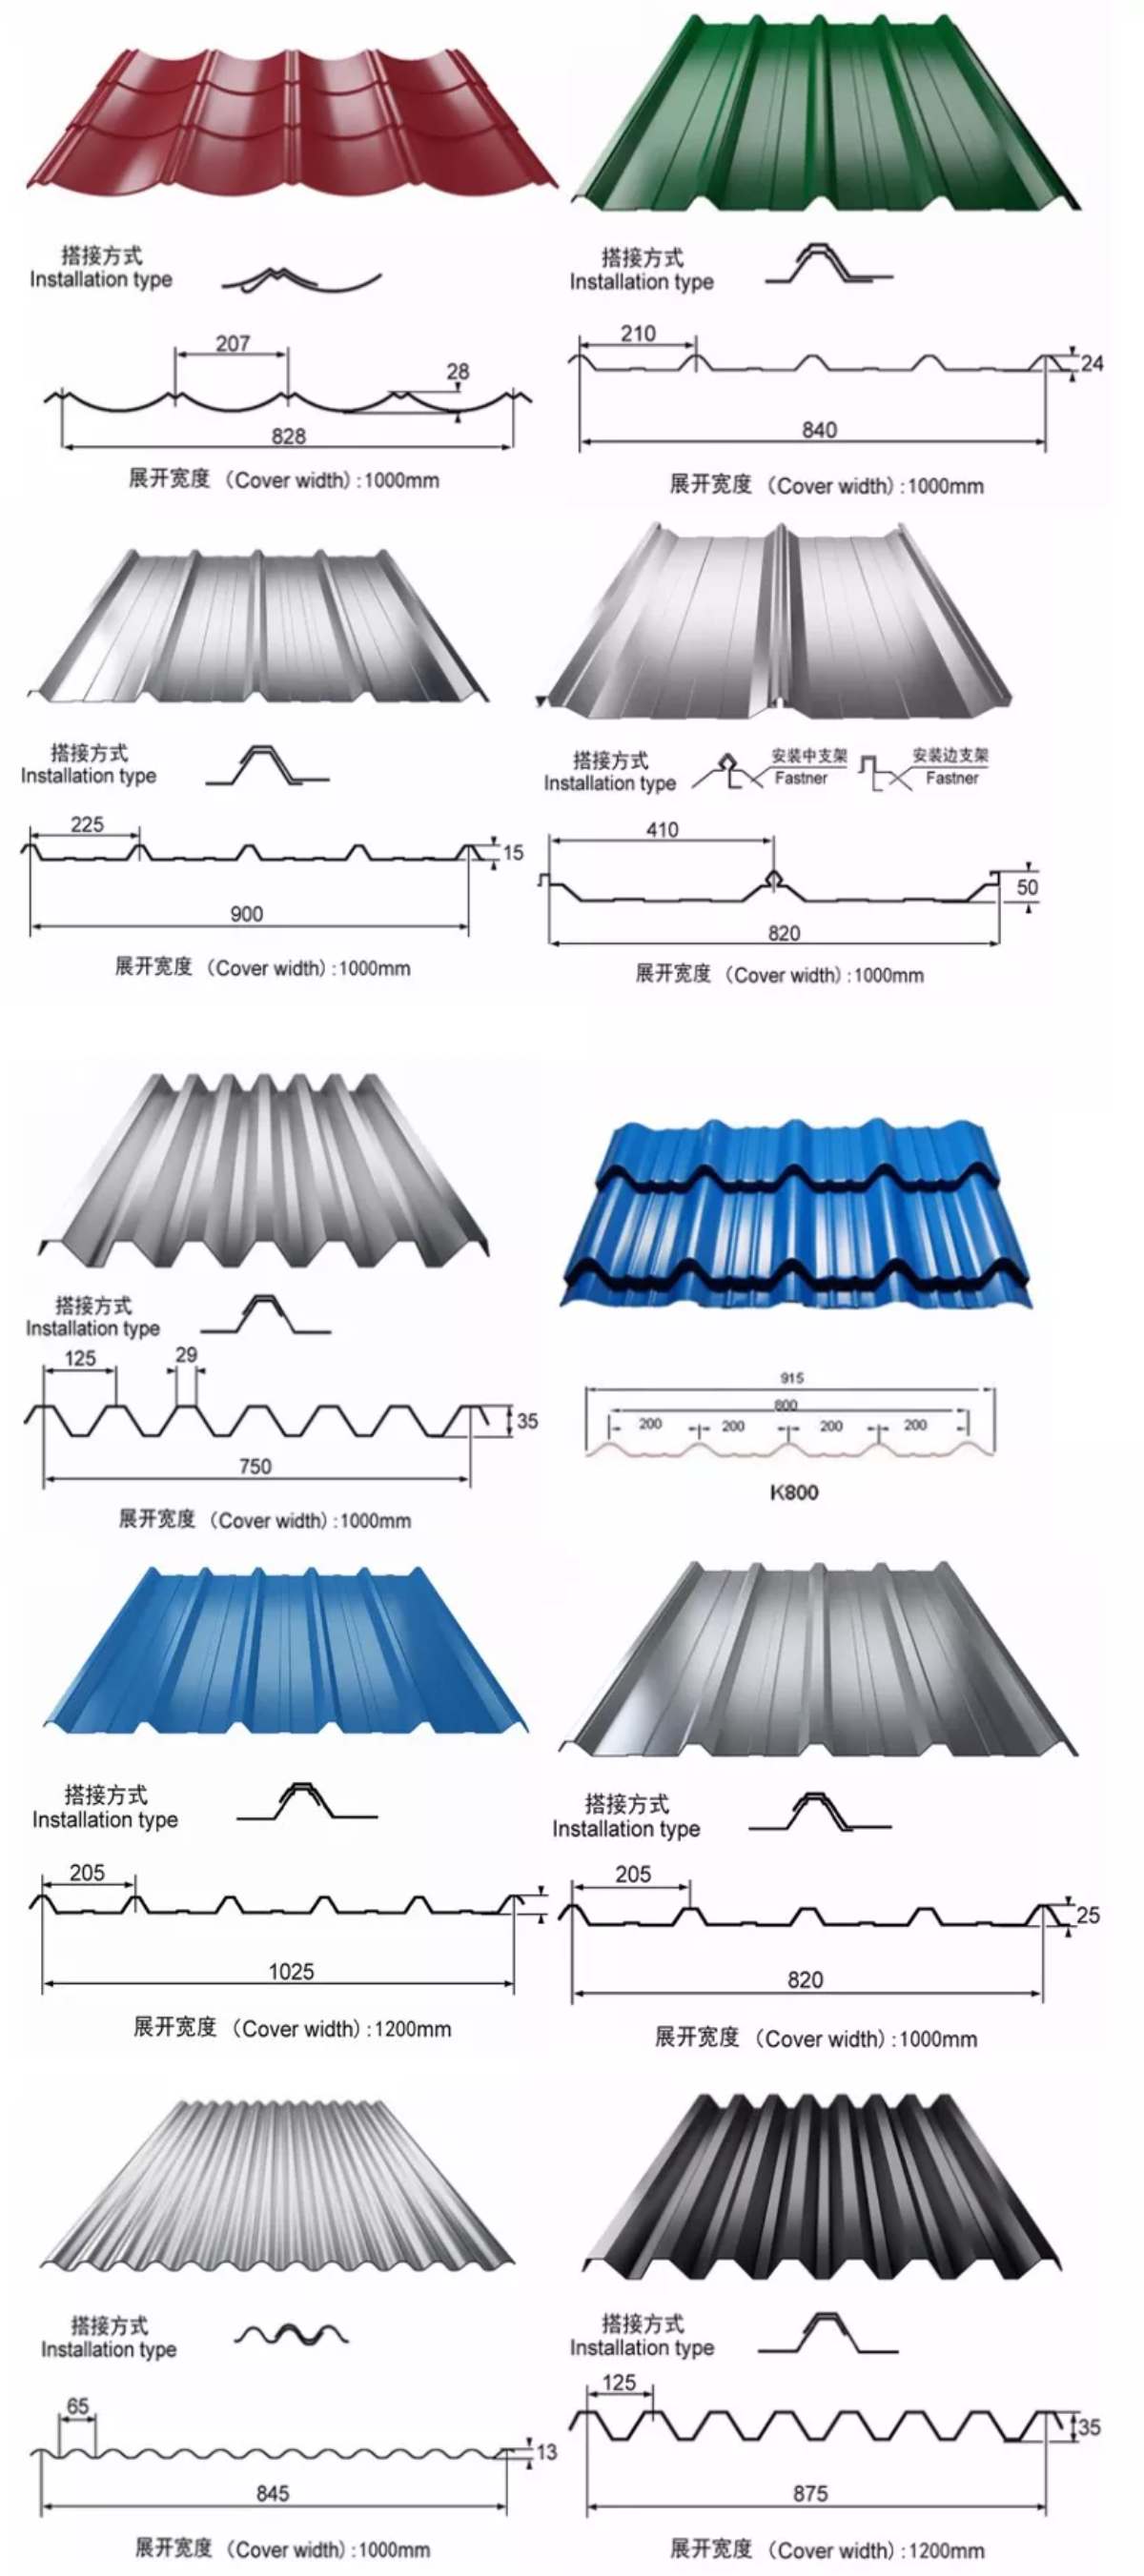 Galvanized corrugated roofing sheet